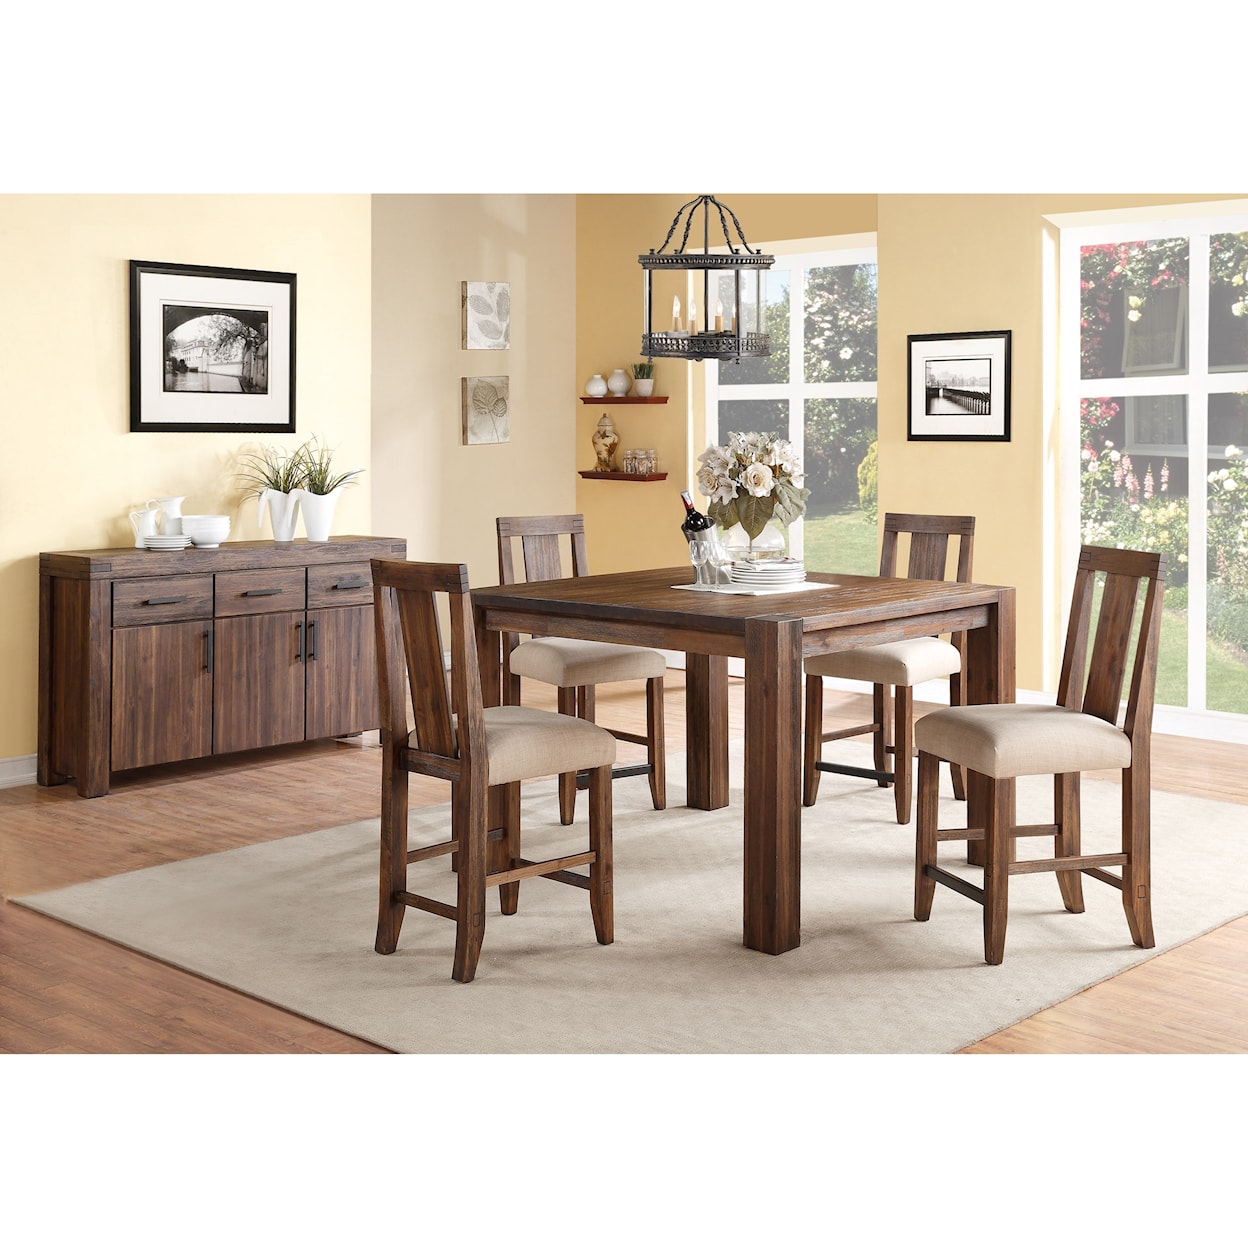 Modus International Meadow Casual Dining Room Group